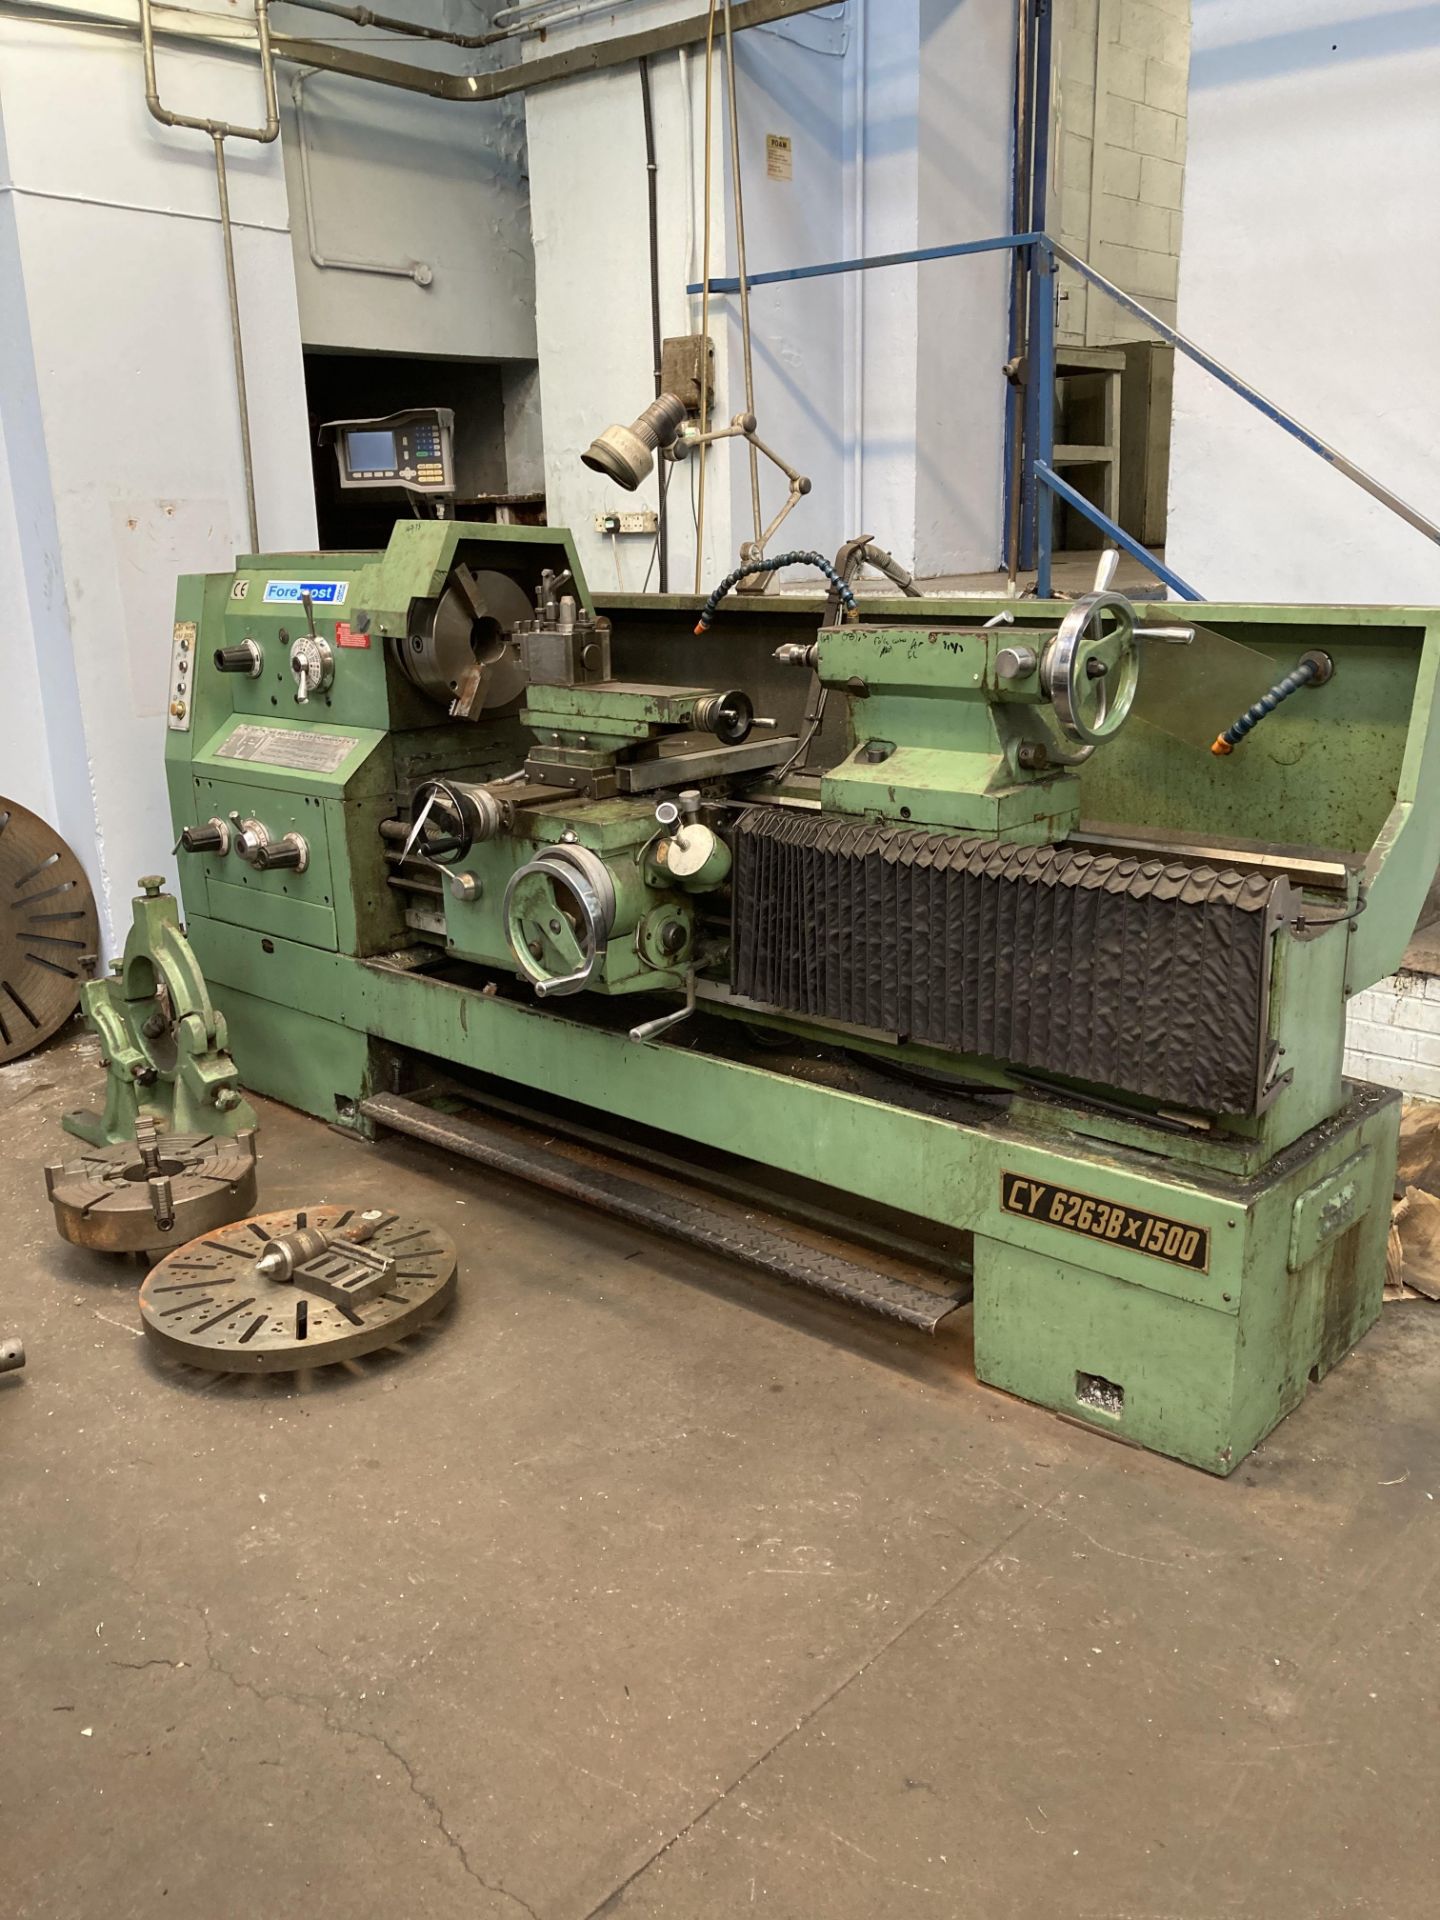 BSA Foremost Model CY6263BX x 1500 gap bed centre lathe, Serial no. 79102733, 450mm (gap in swing) x